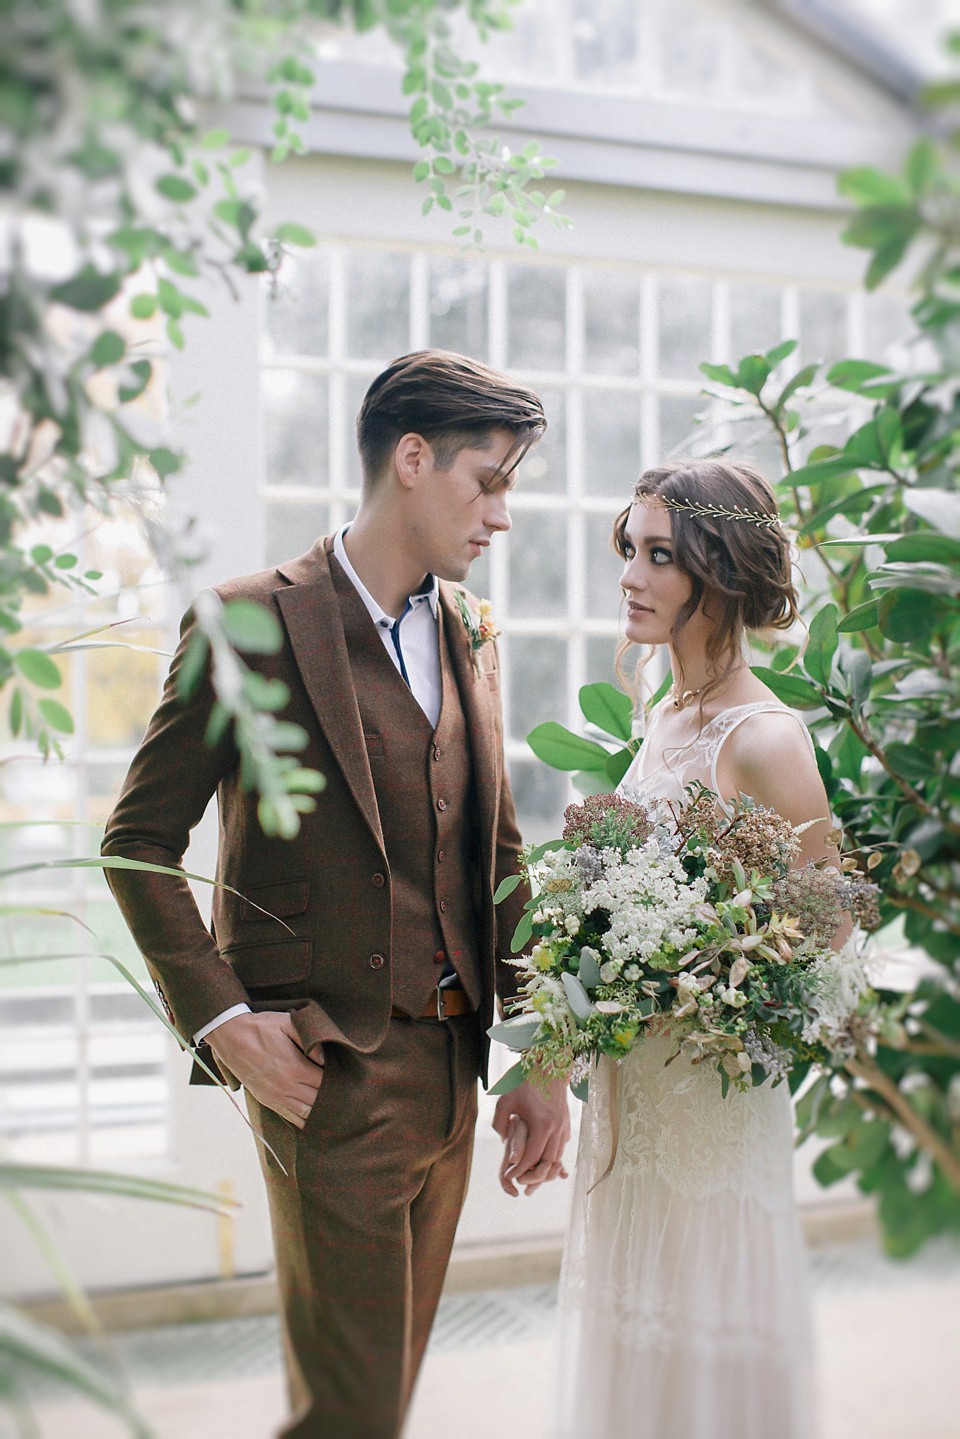 Beautiful 1970's Inspiration for the Modern, Bohemian Bride | Love My ...